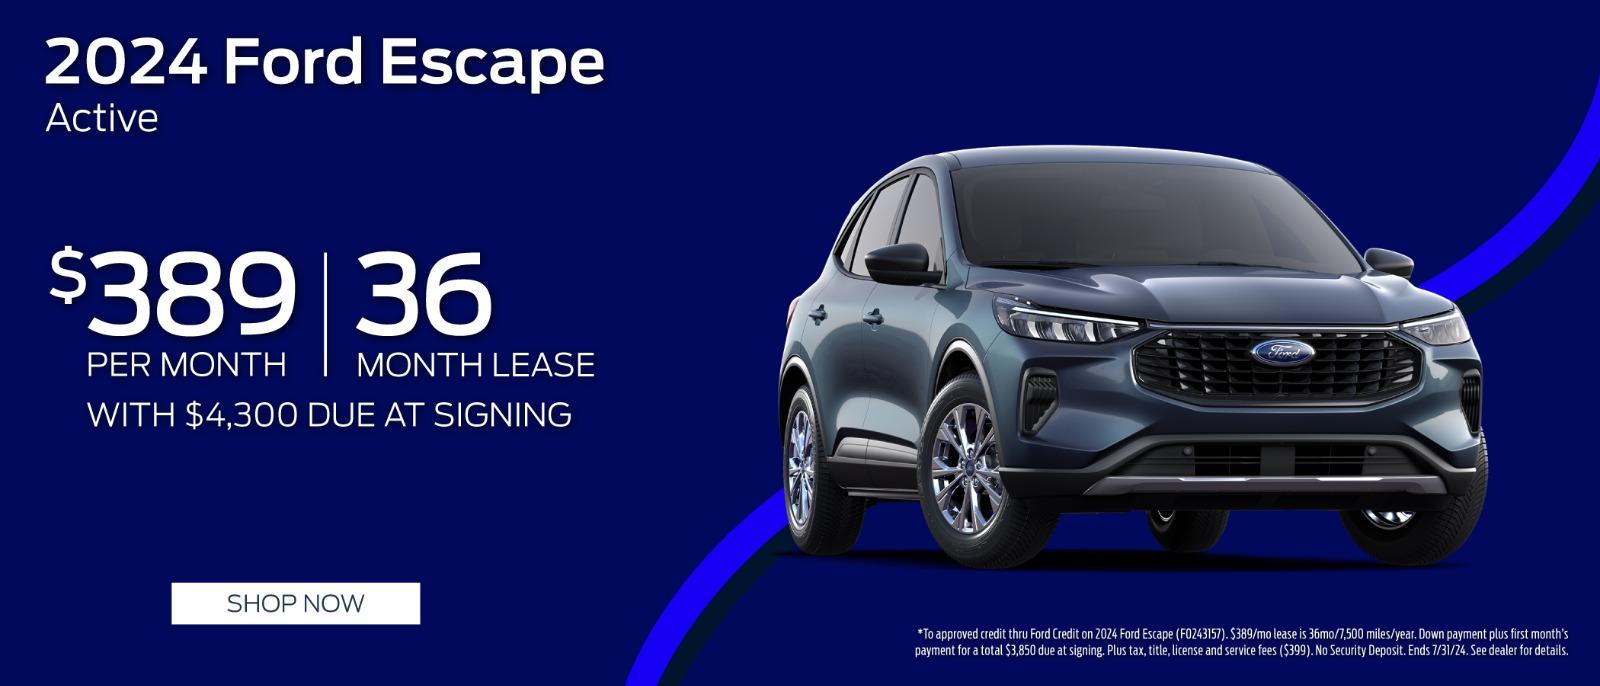 2024 Ford Escape lease for $389 per month for 36 months